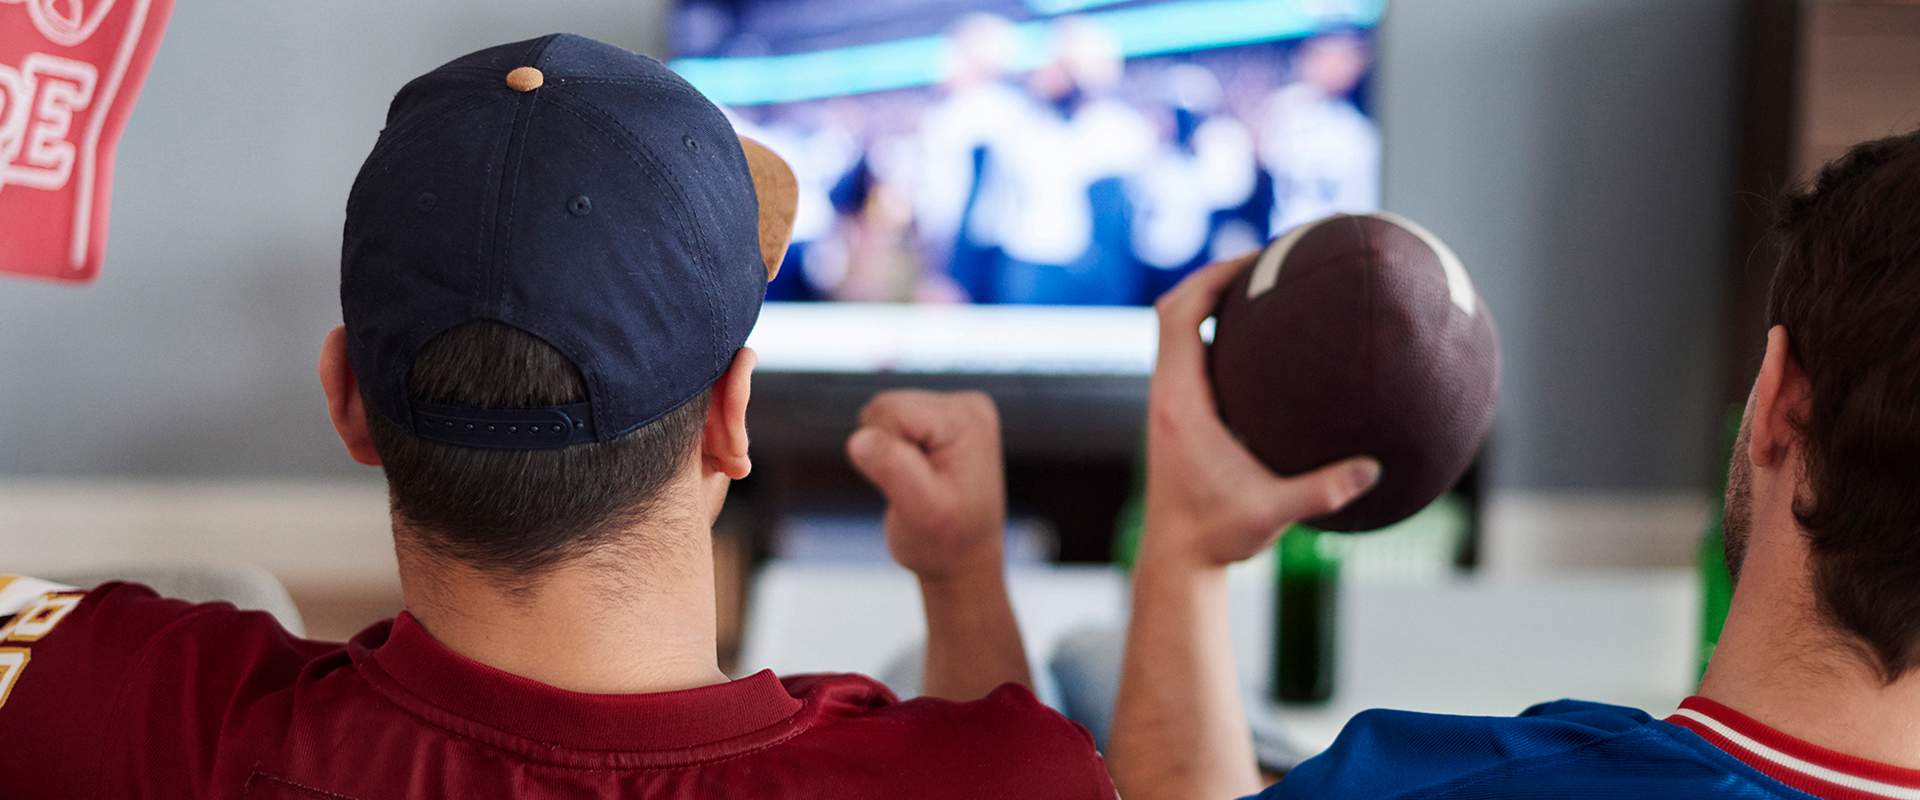 engaged sports fans due to sports gambling